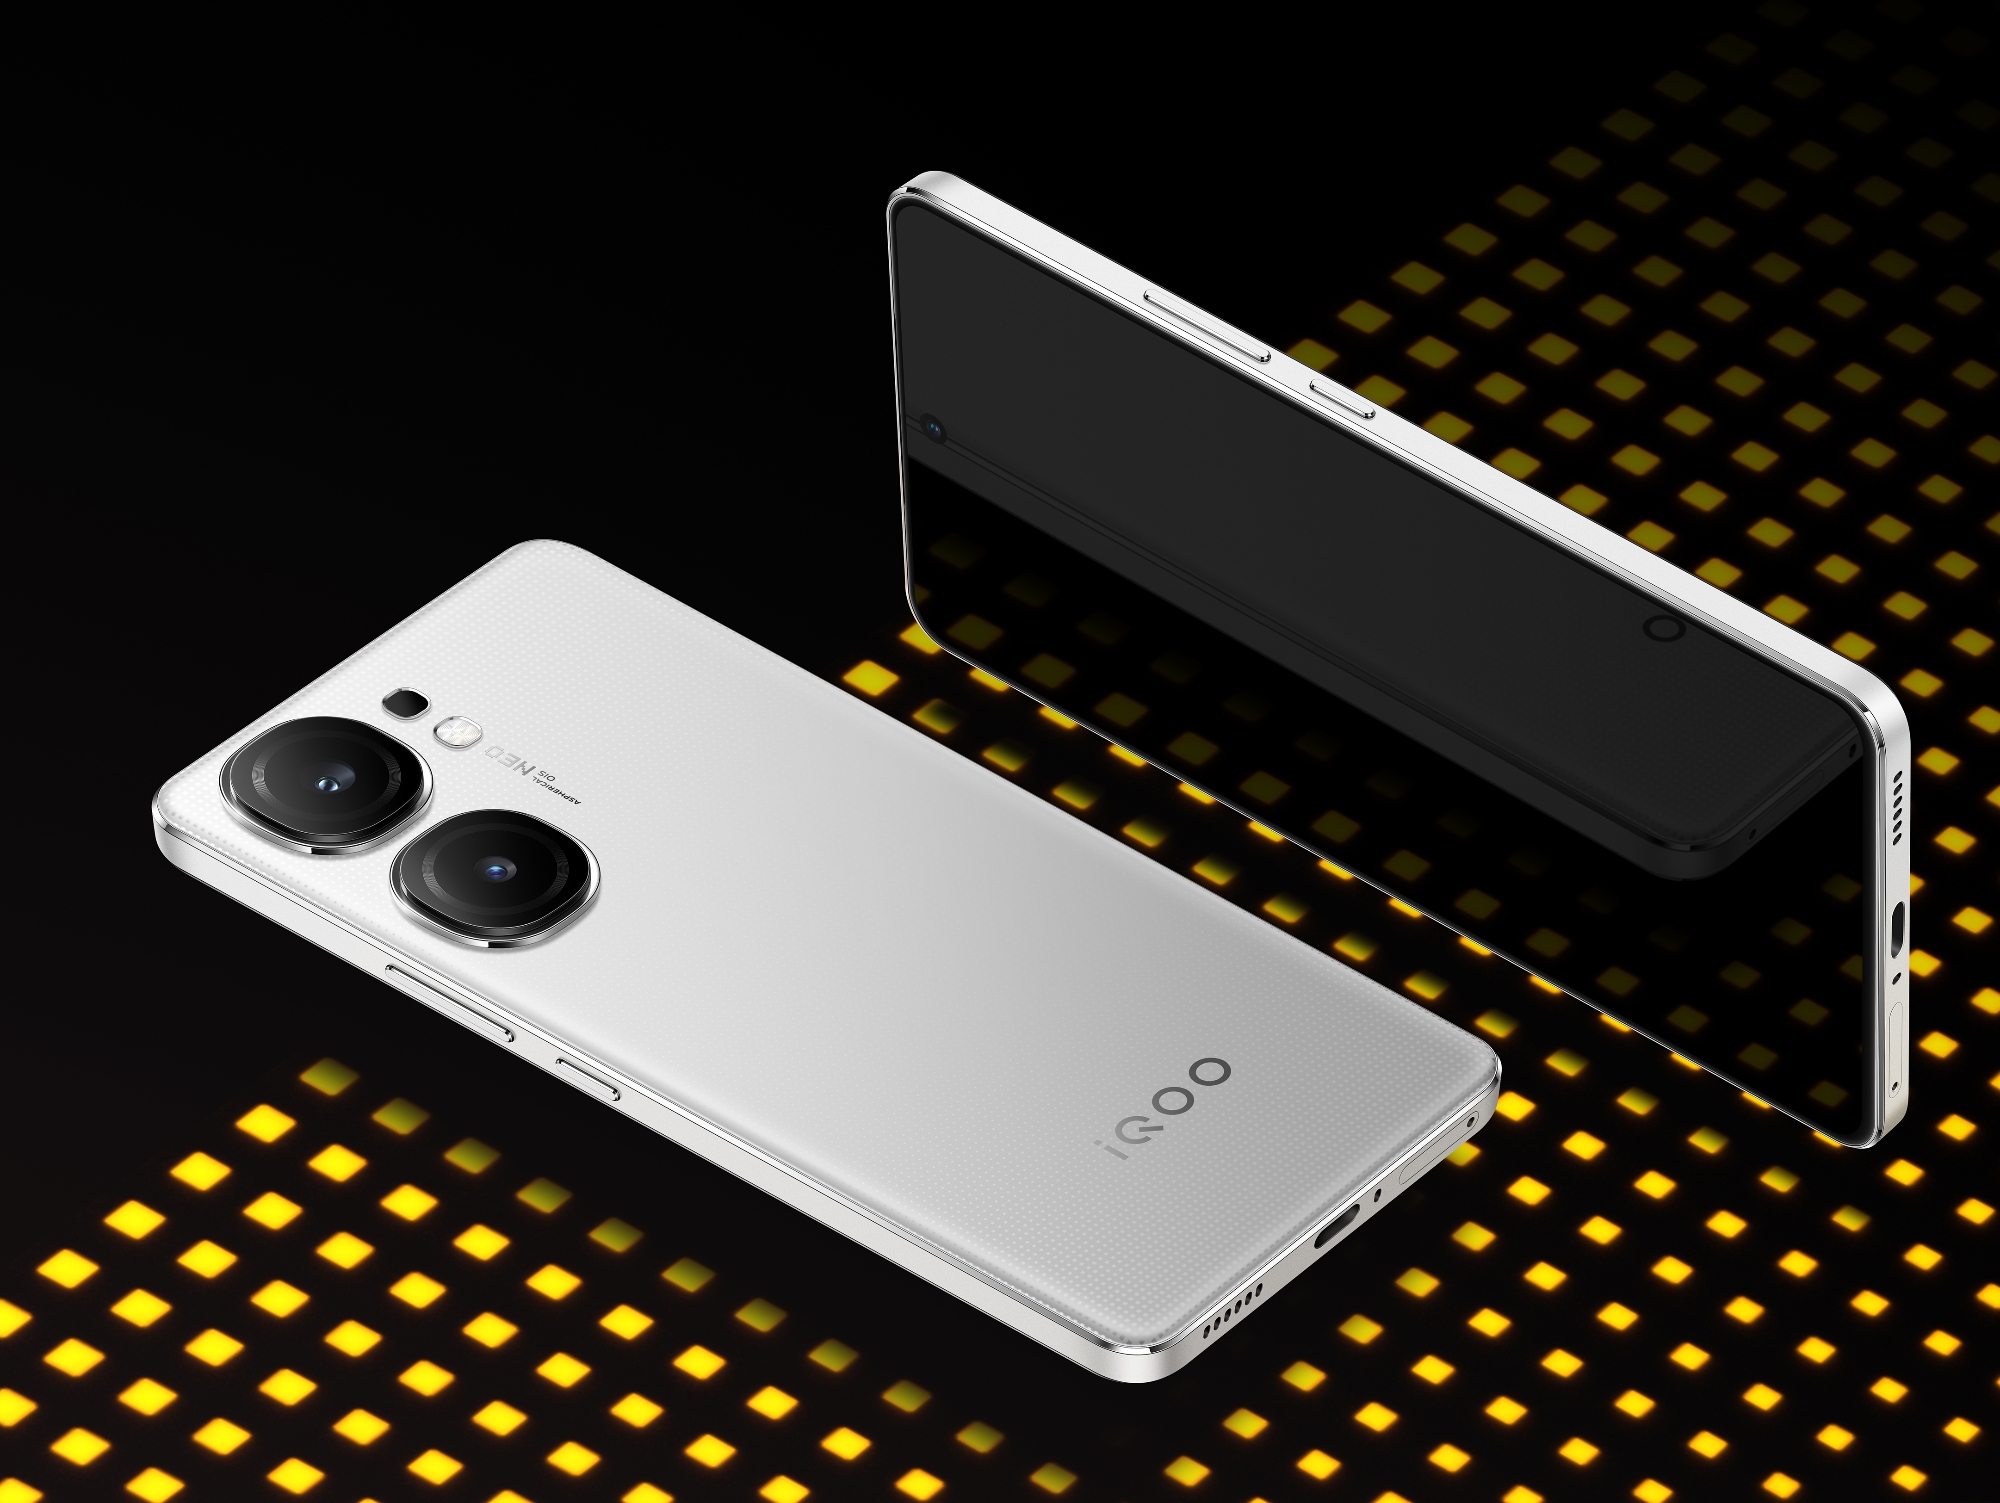 vivo has announced the launch date for the iQOO Neo 9S Pro smartphone with MediaTek Dimensity 9300+ chip on board